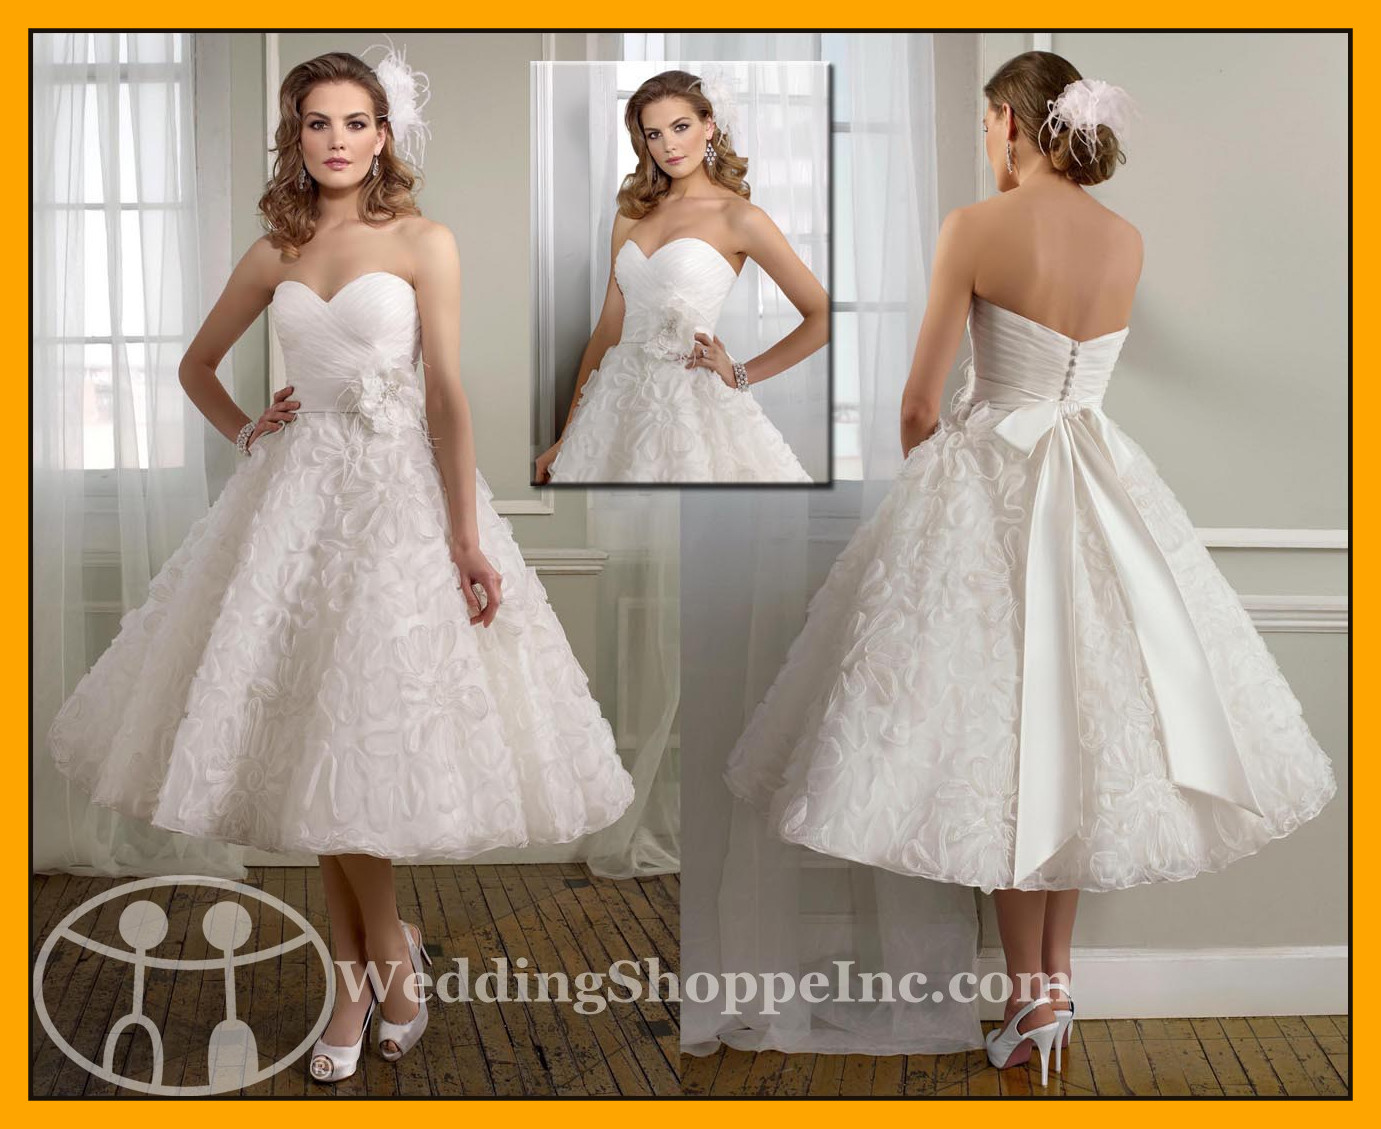 classic vintage style wedding dresses shocking forever classic wedding trends vintage style dresses of s and IVLZFOA